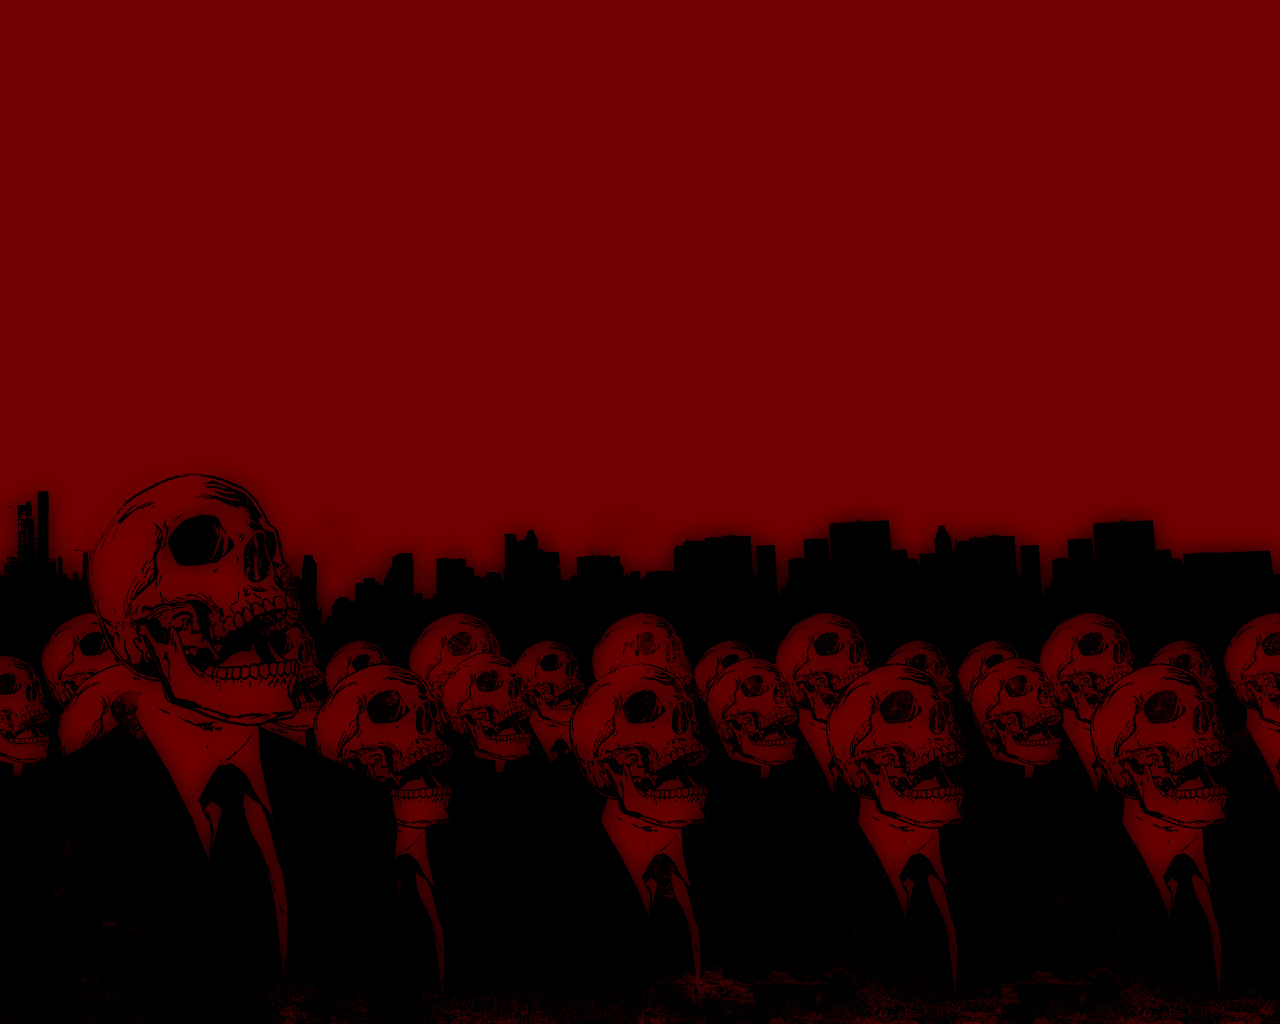 Red Skull Army Wallpaper Background